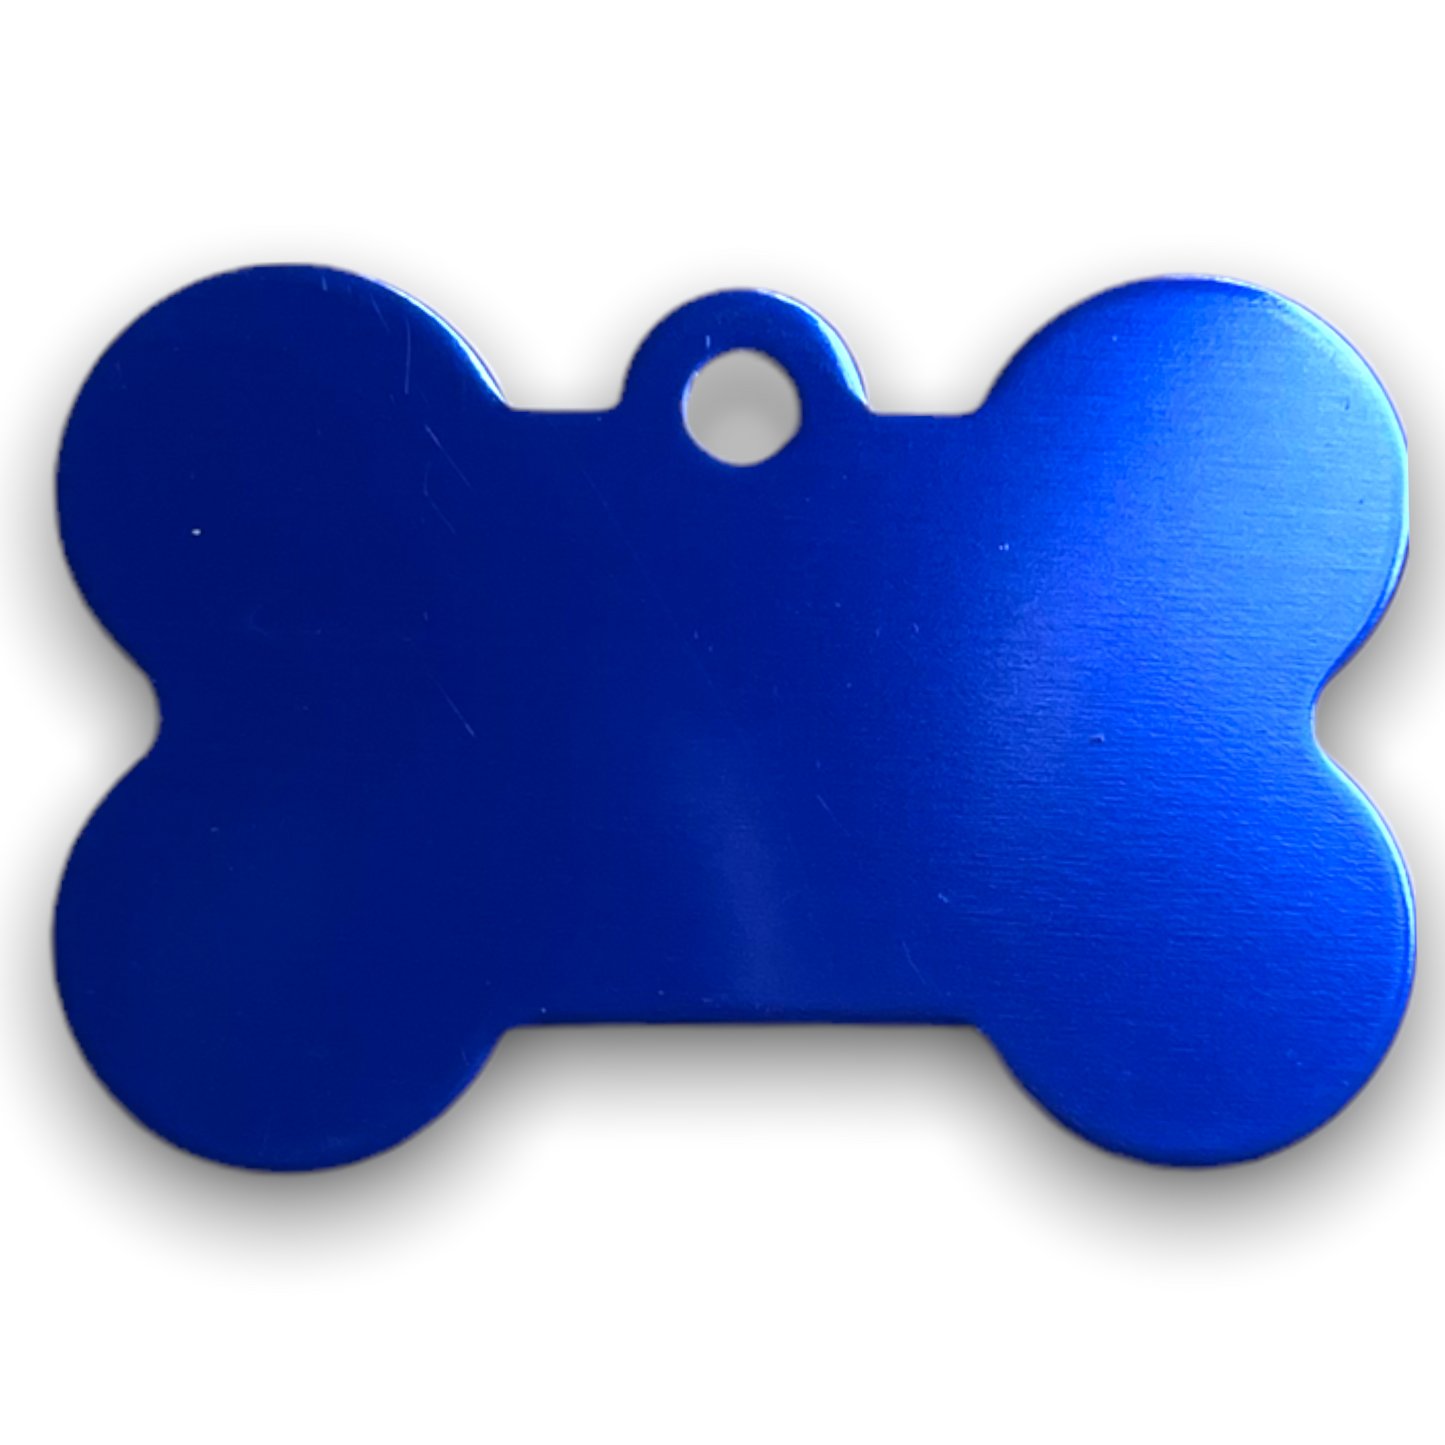 Dog Tag- Name & Number only